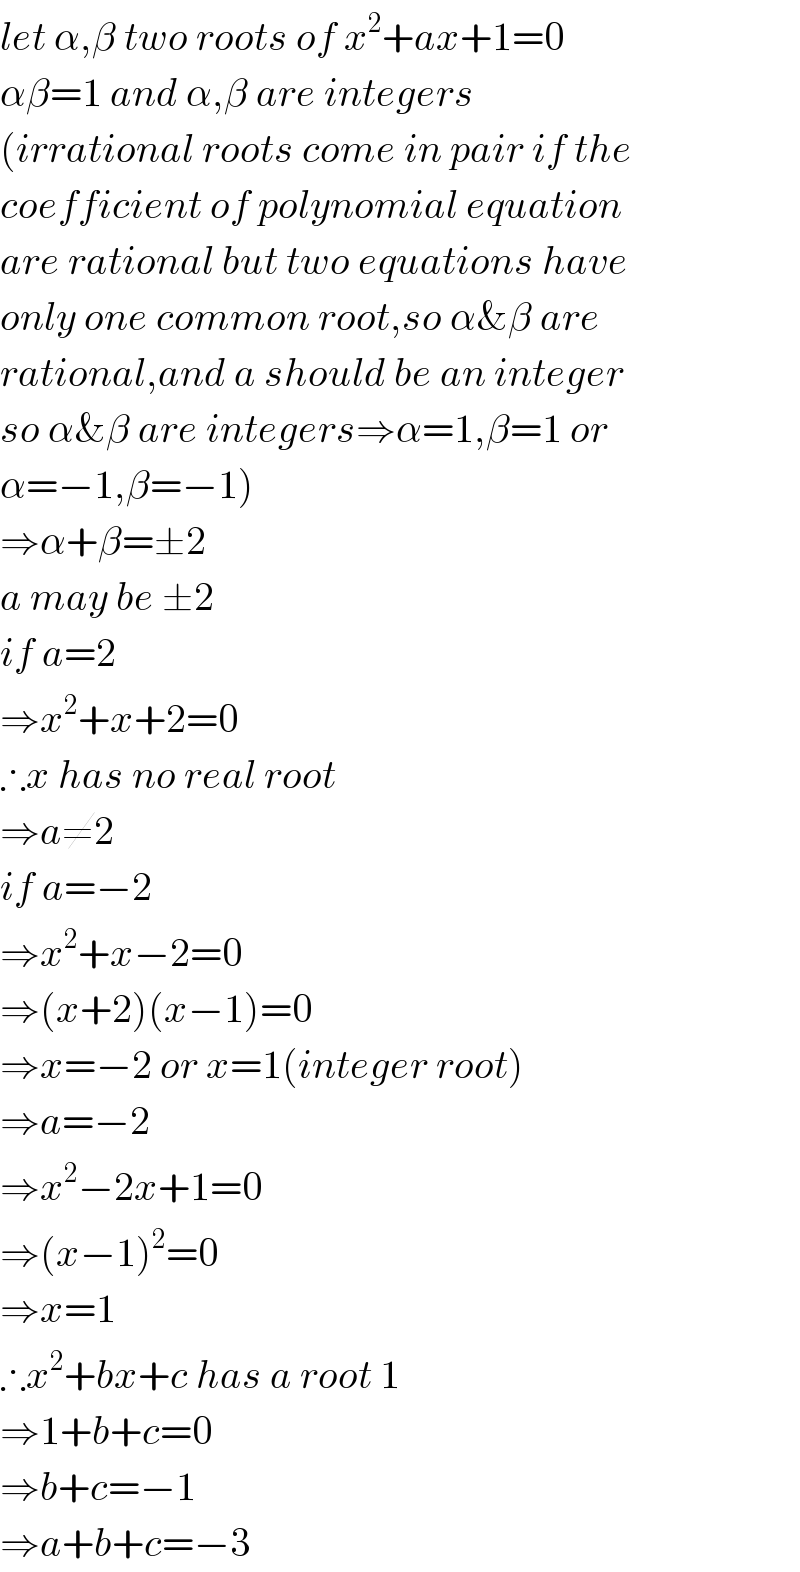 let α,β two roots of x^2 +ax+1=0  αβ=1 and α,β are integers  (irrational roots come in pair if the  coefficient of polynomial equation  are rational but two equations have   only one common root,so α&β are  rational,and a should be an integer  so α&β are integers⇒α=1,β=1 or  α=−1,β=−1)  ⇒α+β=±2  a may be ±2  if a=2  ⇒x^2 +x+2=0  ∴x has no real root  ⇒a≠2  if a=−2  ⇒x^2 +x−2=0  ⇒(x+2)(x−1)=0  ⇒x=−2 or x=1(integer root)  ⇒a=−2  ⇒x^2 −2x+1=0  ⇒(x−1)^2 =0  ⇒x=1  ∴x^2 +bx+c has a root 1  ⇒1+b+c=0  ⇒b+c=−1  ⇒a+b+c=−3  